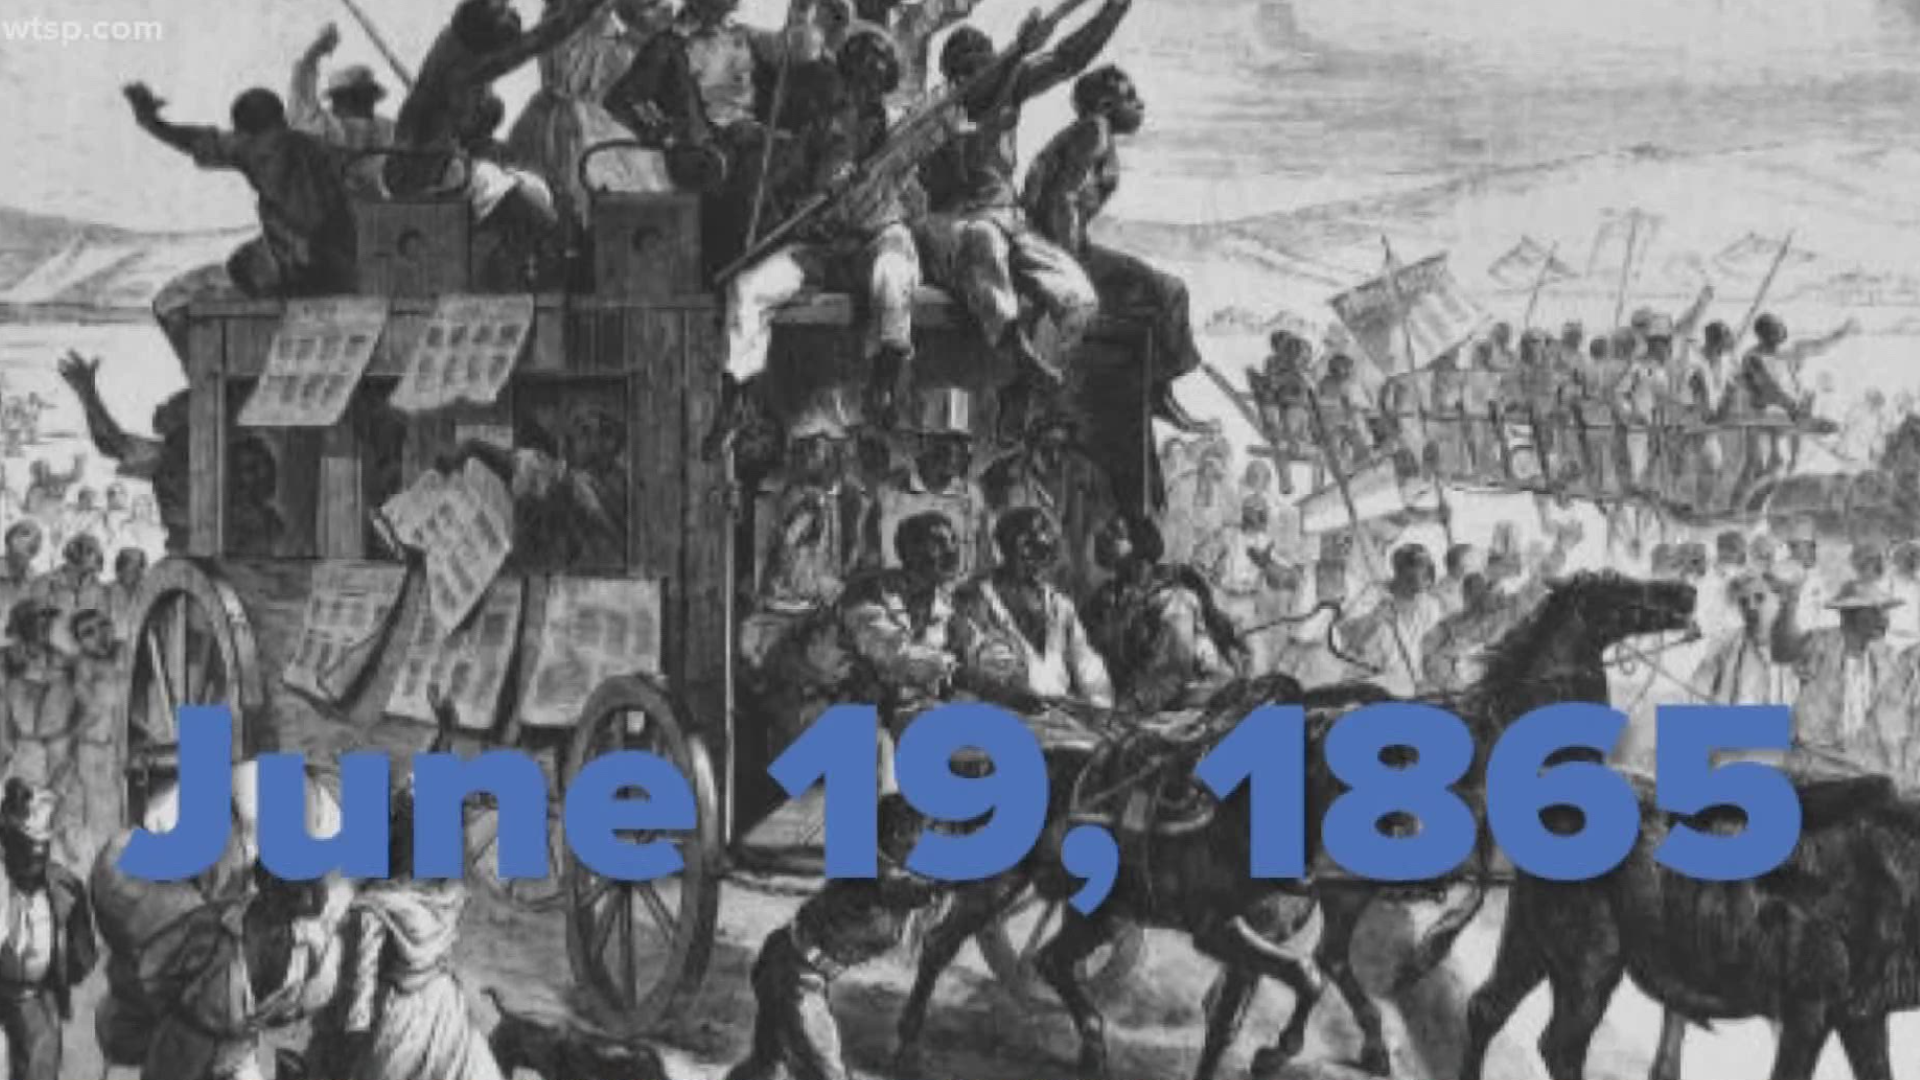 June 19, 1865, was an historic day for the Black community and the United States.